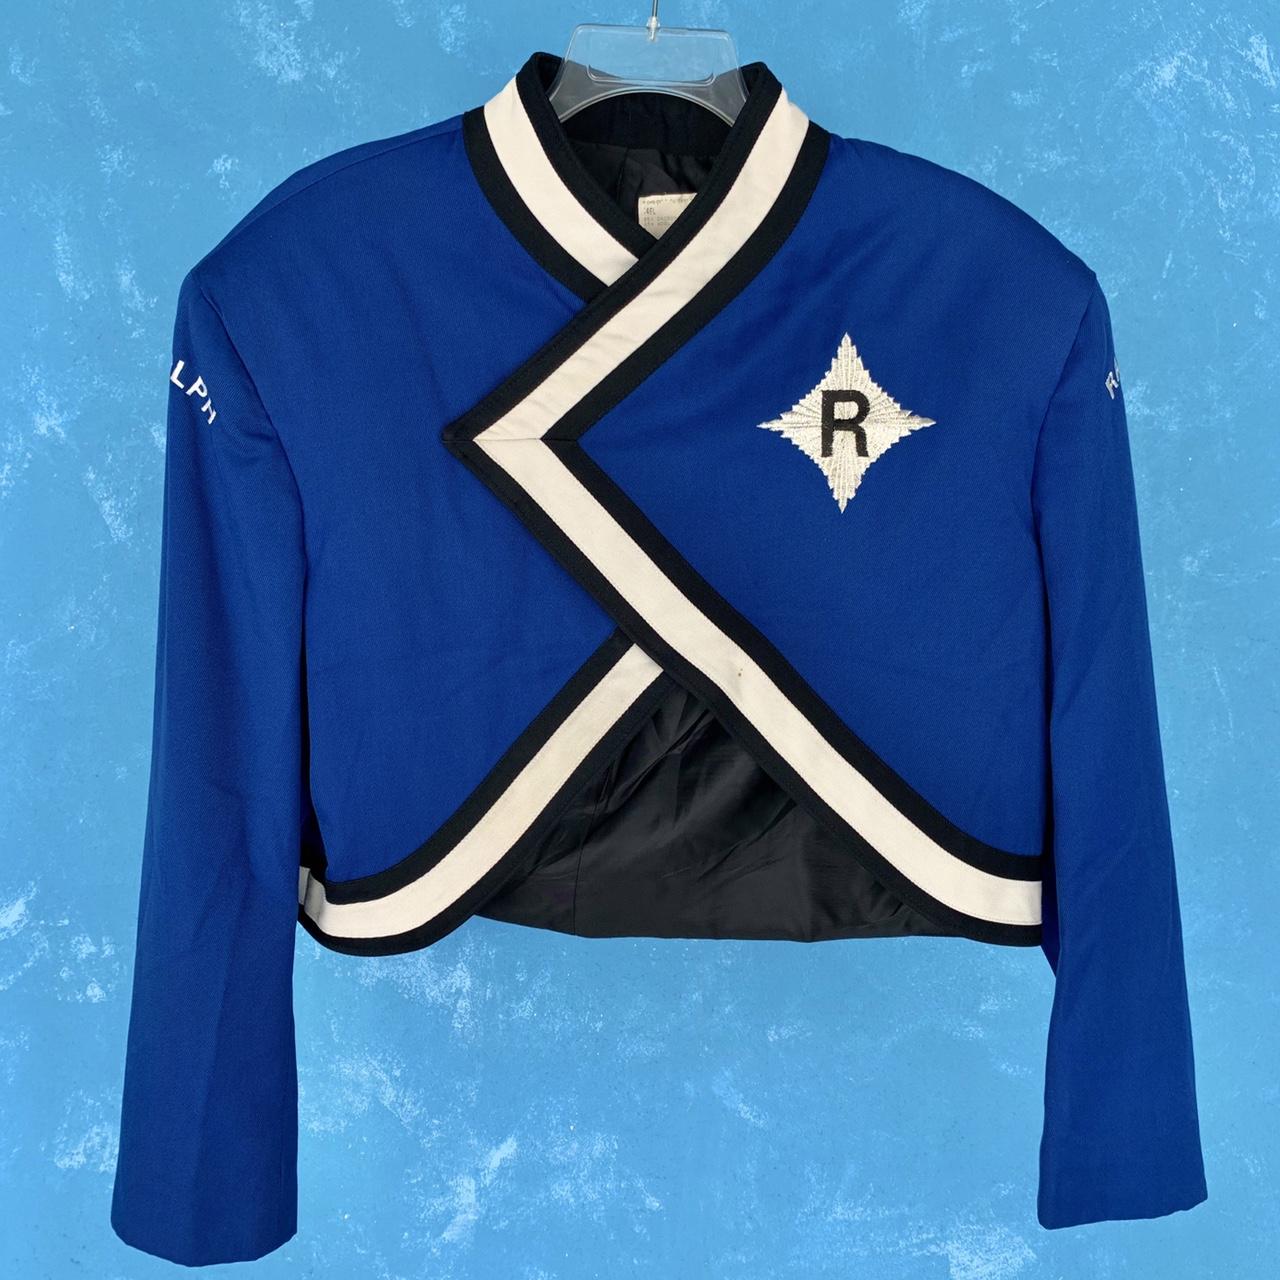 Blue Cropped Band Jacket 💙 Amazing real marching - Depop